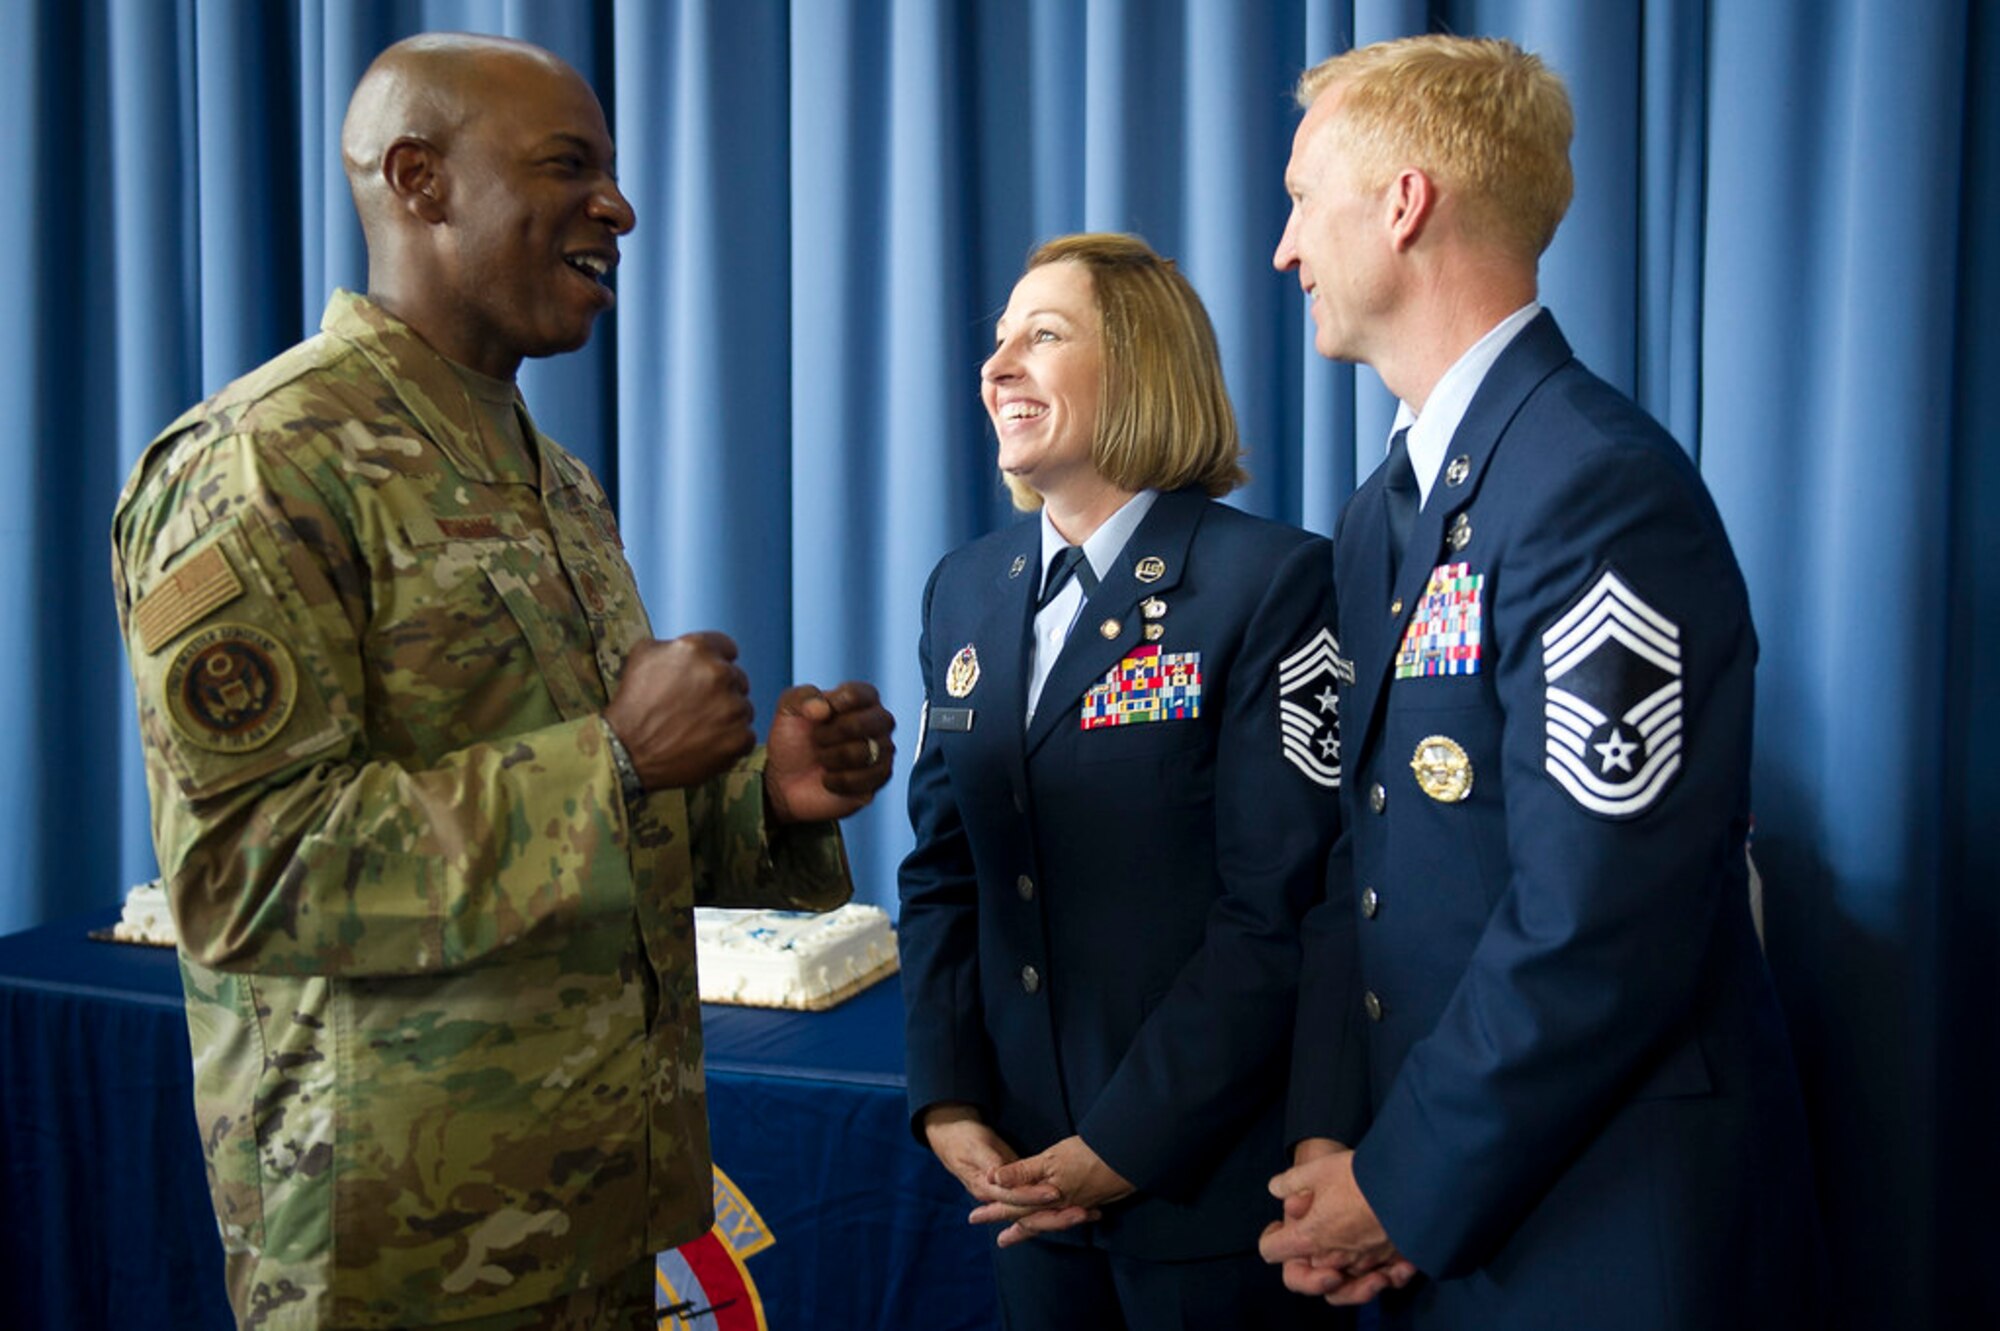 Chief Master Sergeant of the Air Force Kaleth O. Wright, left, congratulates Chief Master Sgts. Melanie K. Noel, Air Force District of Washington command chief, and Michael D. Noel, Senior Enlisted Advisor to the Assistant to the Secretary of Defense for Public Affairs, after their combined retirement ceremony at Joint Base Anacostia-Bolling, Washington, D.C., May 31, 2019. (U.S. Air Force photo by Master Sgt. Michael B. Keller)